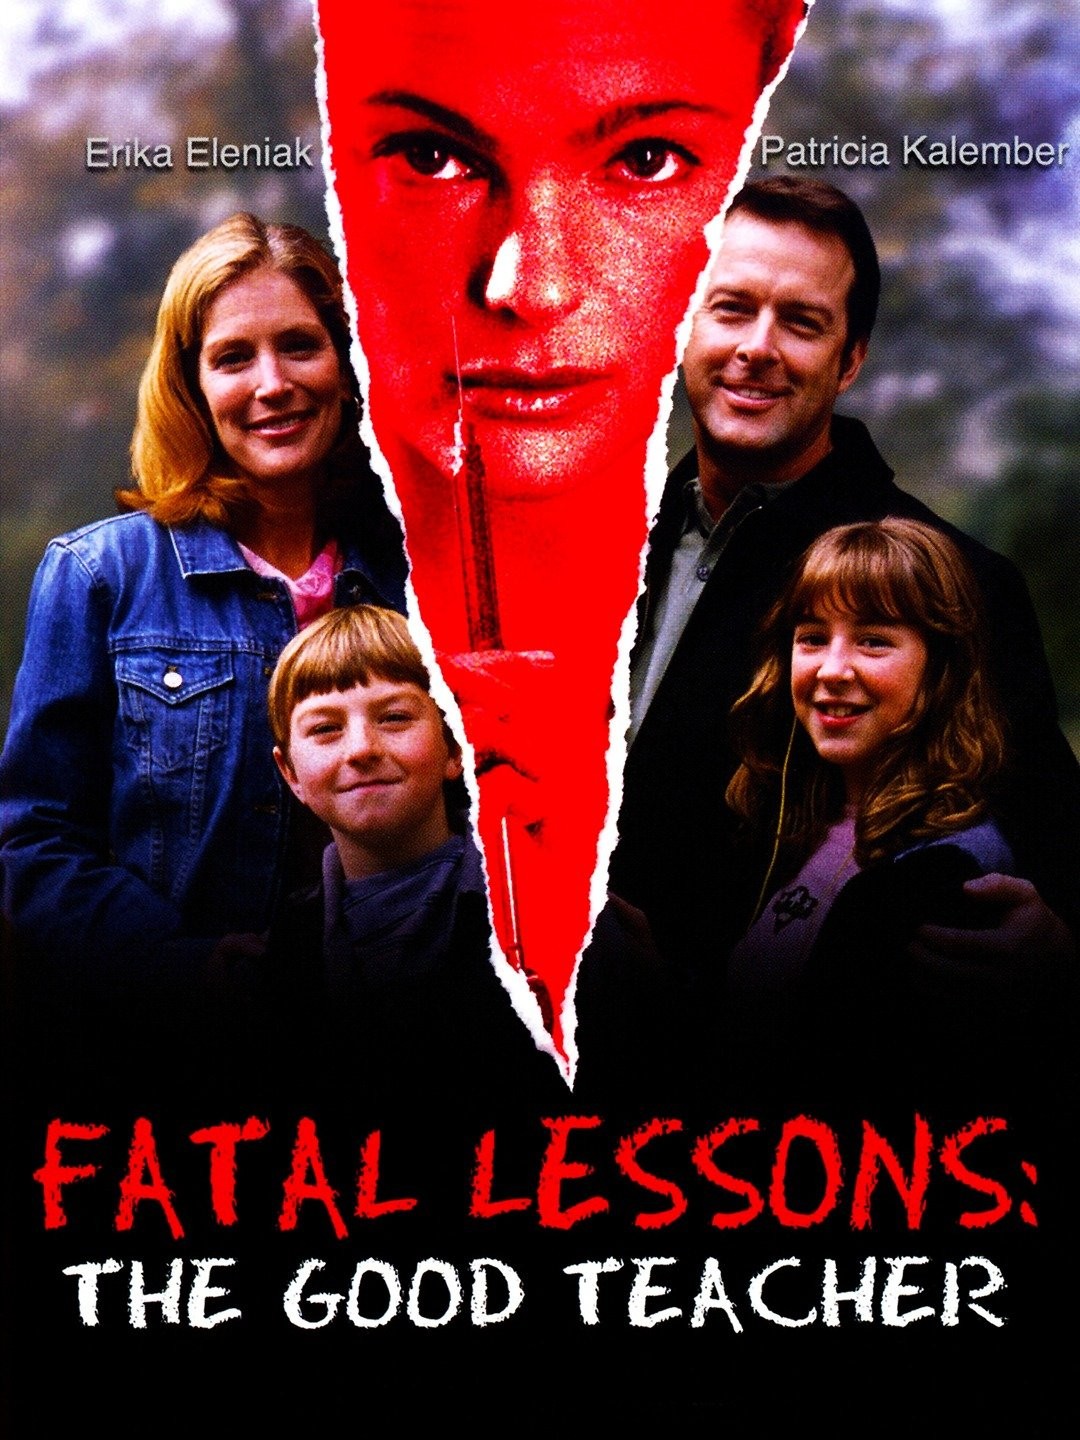 Fatal lessons in this pandemic